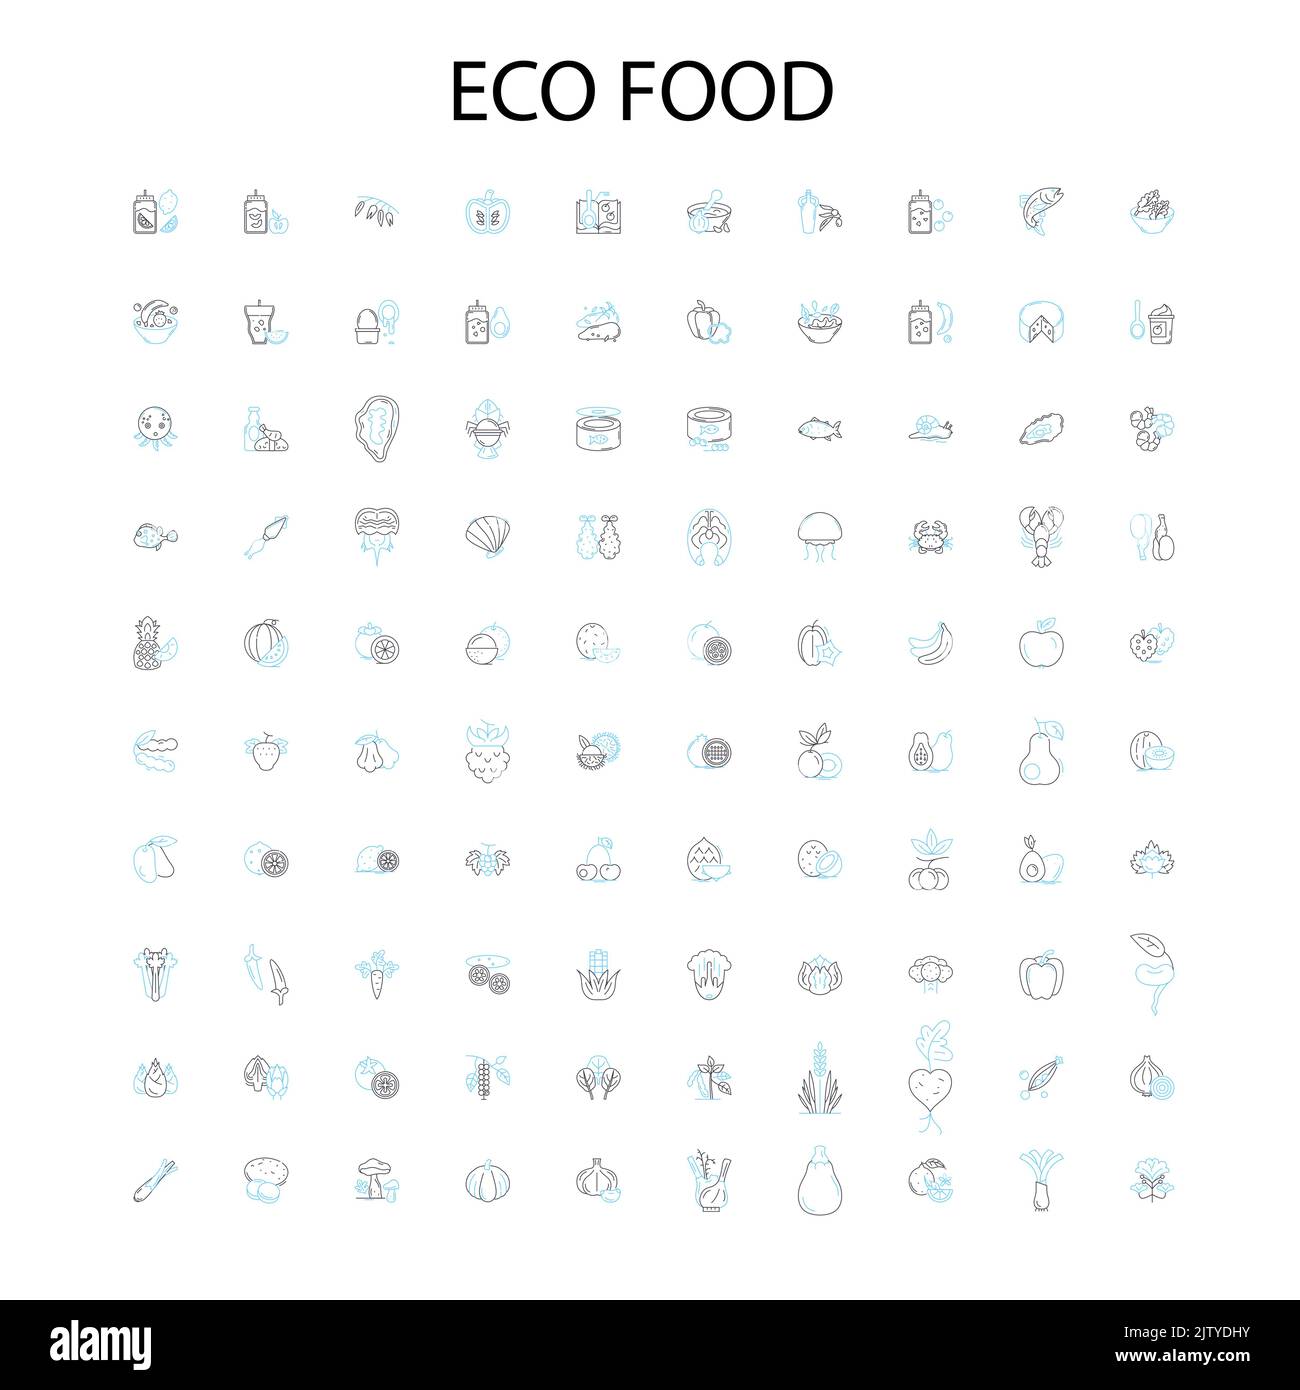 eco food icons, signs, outline symbols, concept linear illustration line collection Stock Vector